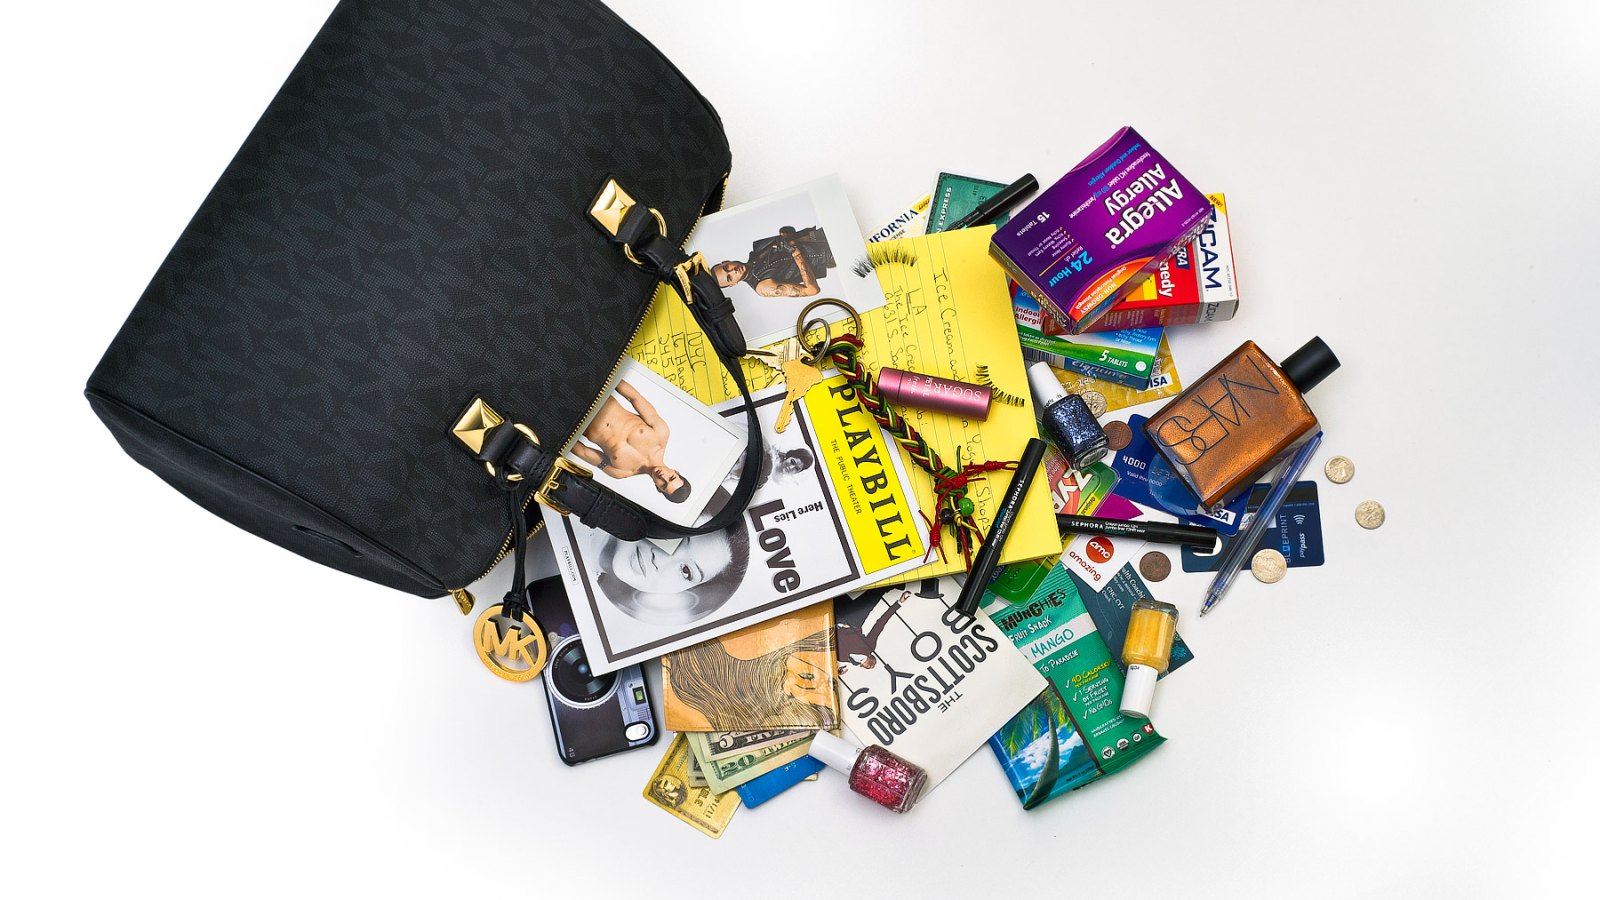 See what's in Tyra Bank's bag